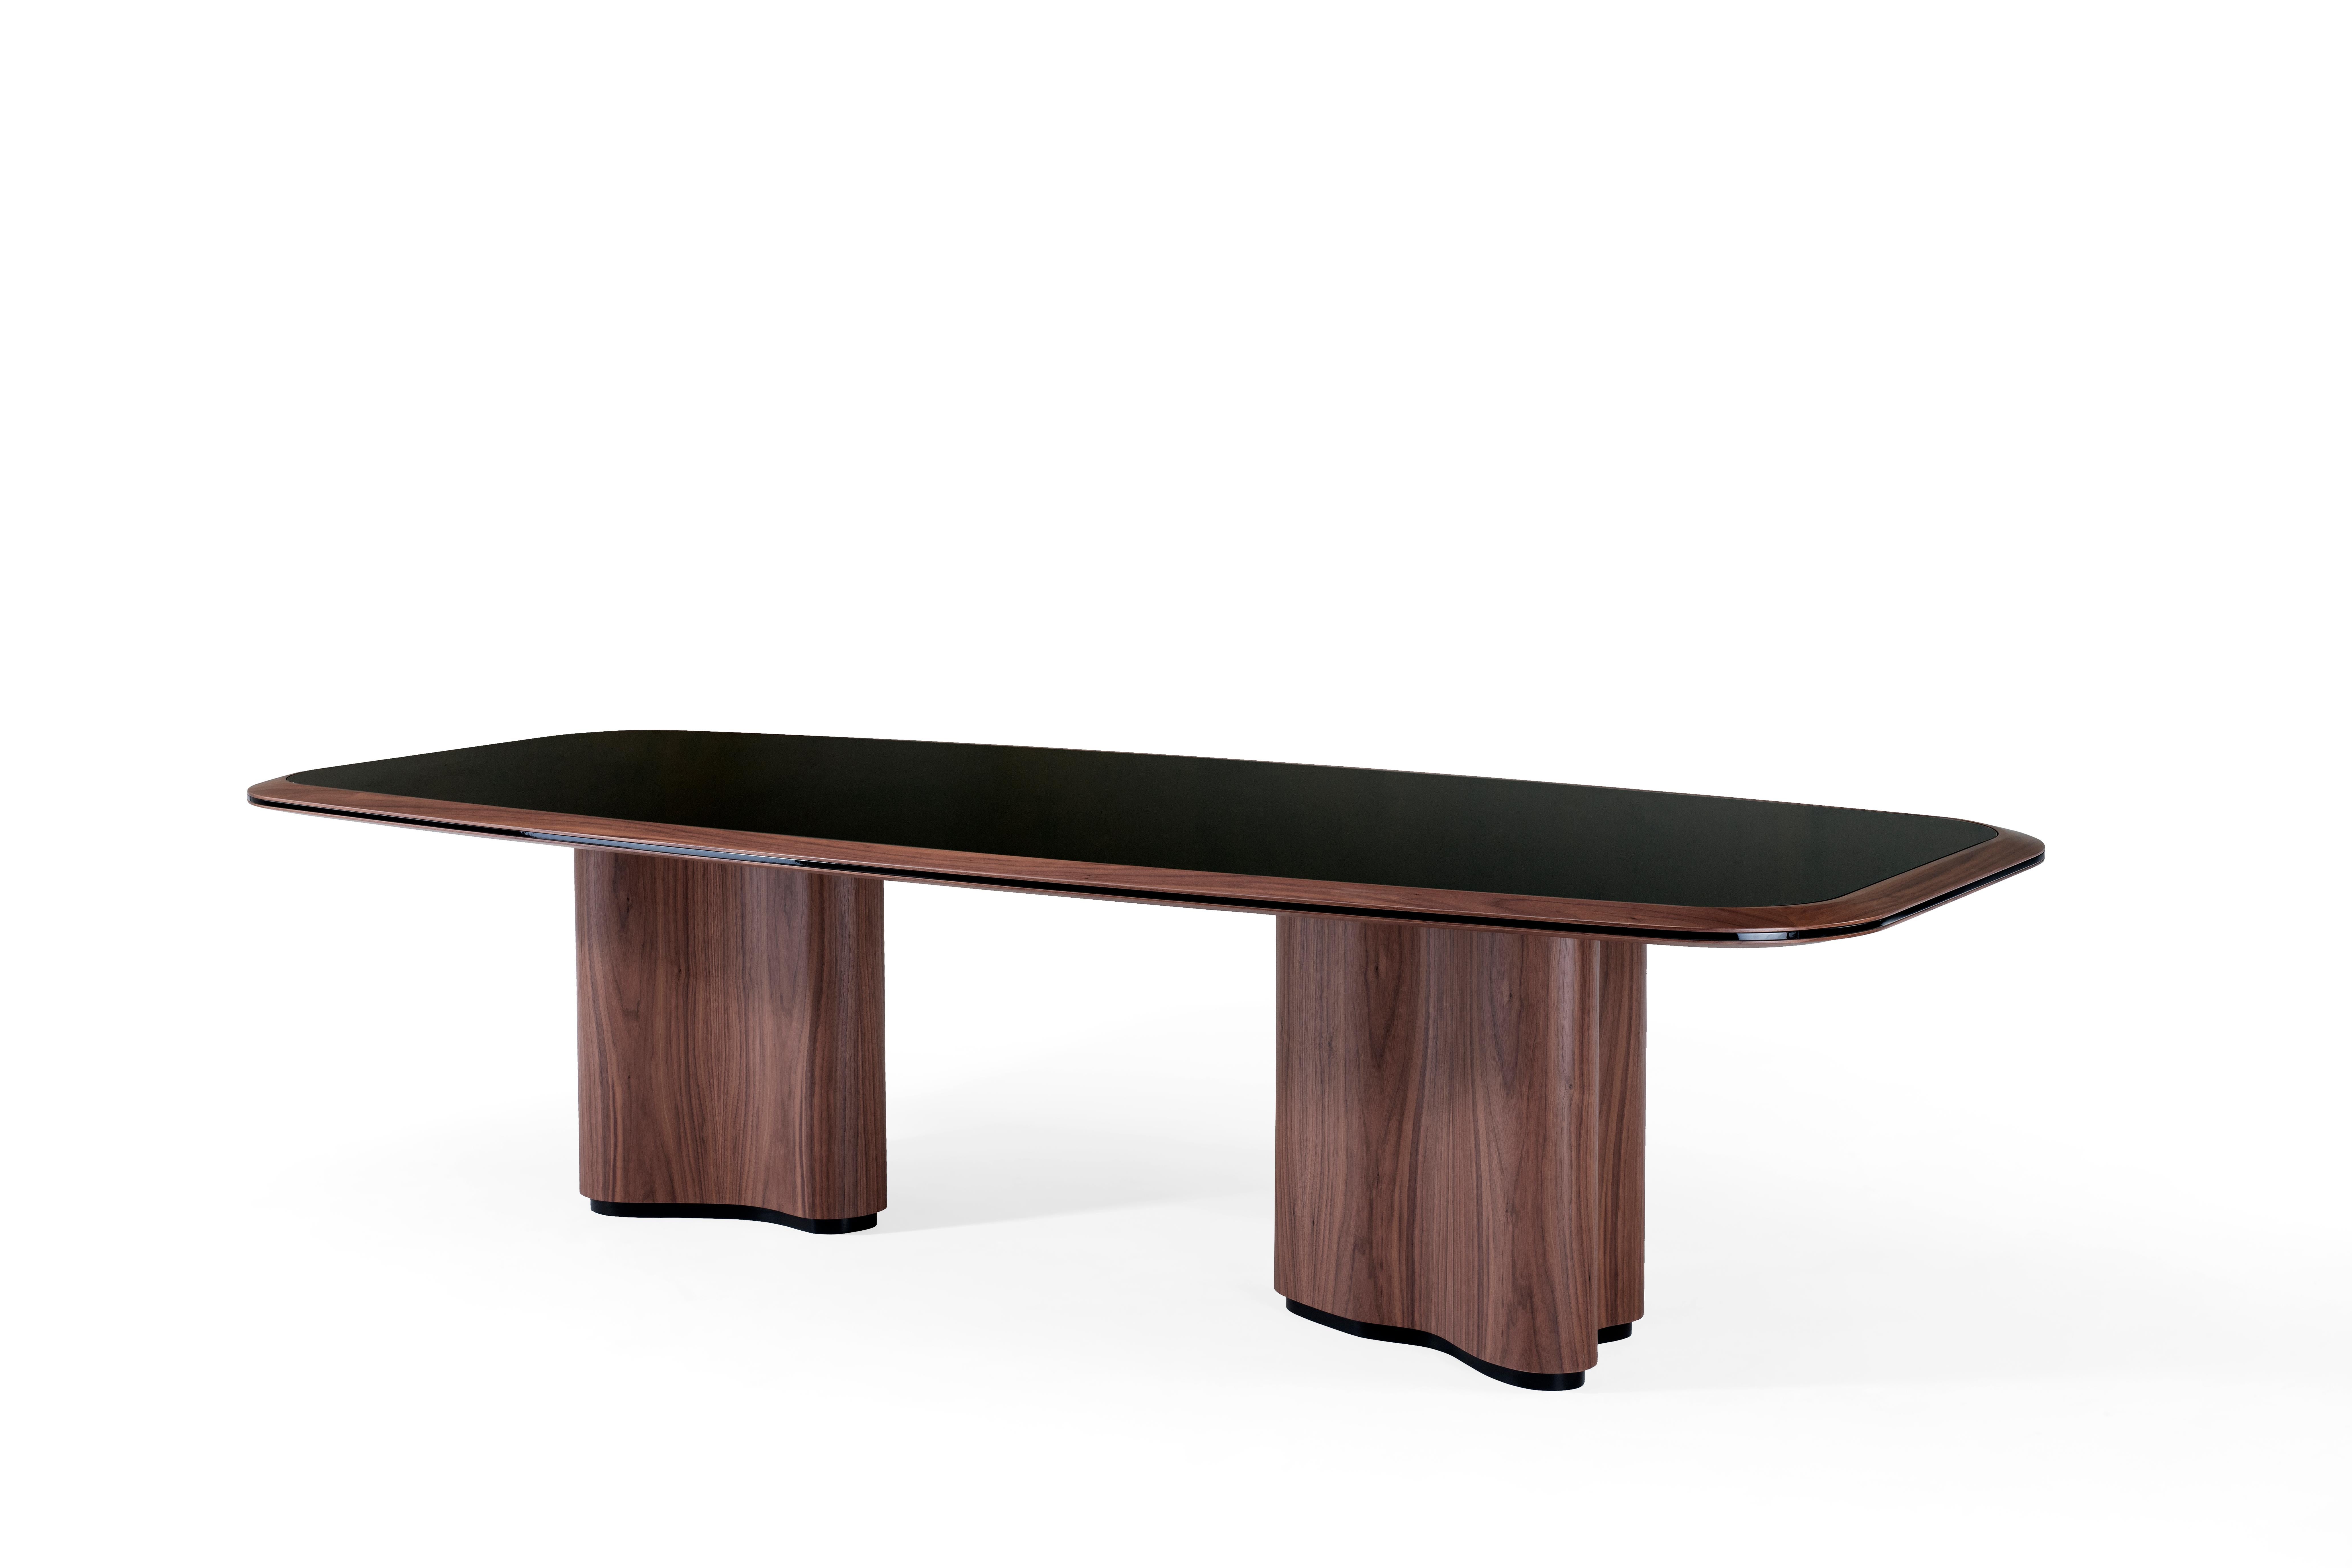 Named MUXIMA [heart], this stunning dining table has a truly sophisticated look with understated elegance. The organic-shape feet serve as a base for the wooden top, finished in black glass but also available in lacquer or wood veneer.
MUXIMA can be